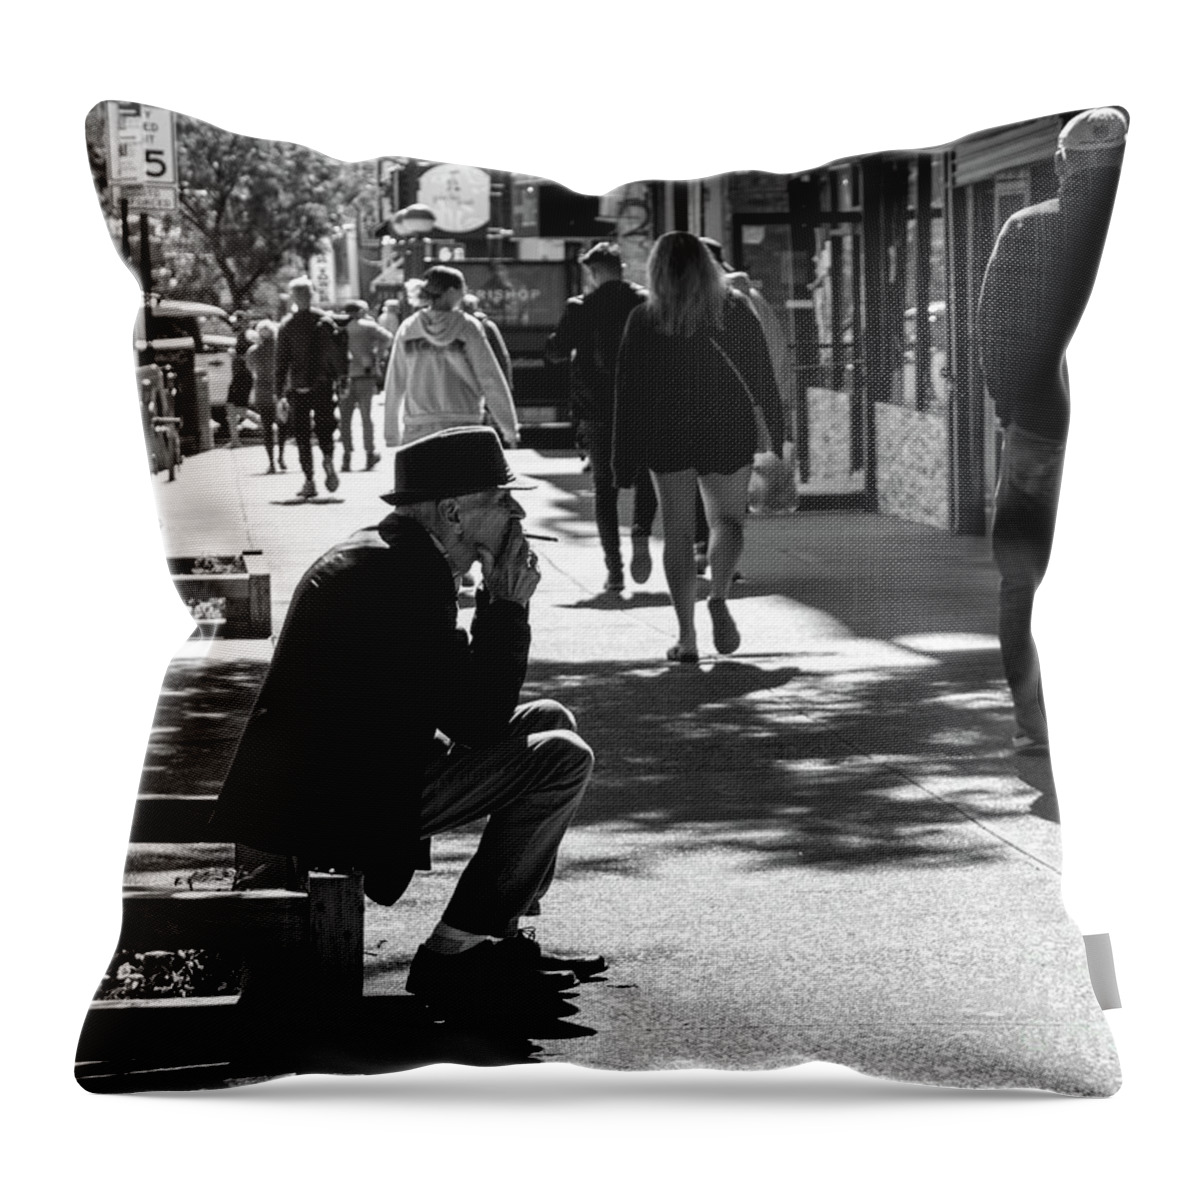 Smoking Throw Pillow featuring the photograph Smoking Man, Inwood, 2019 by Cole Thompson